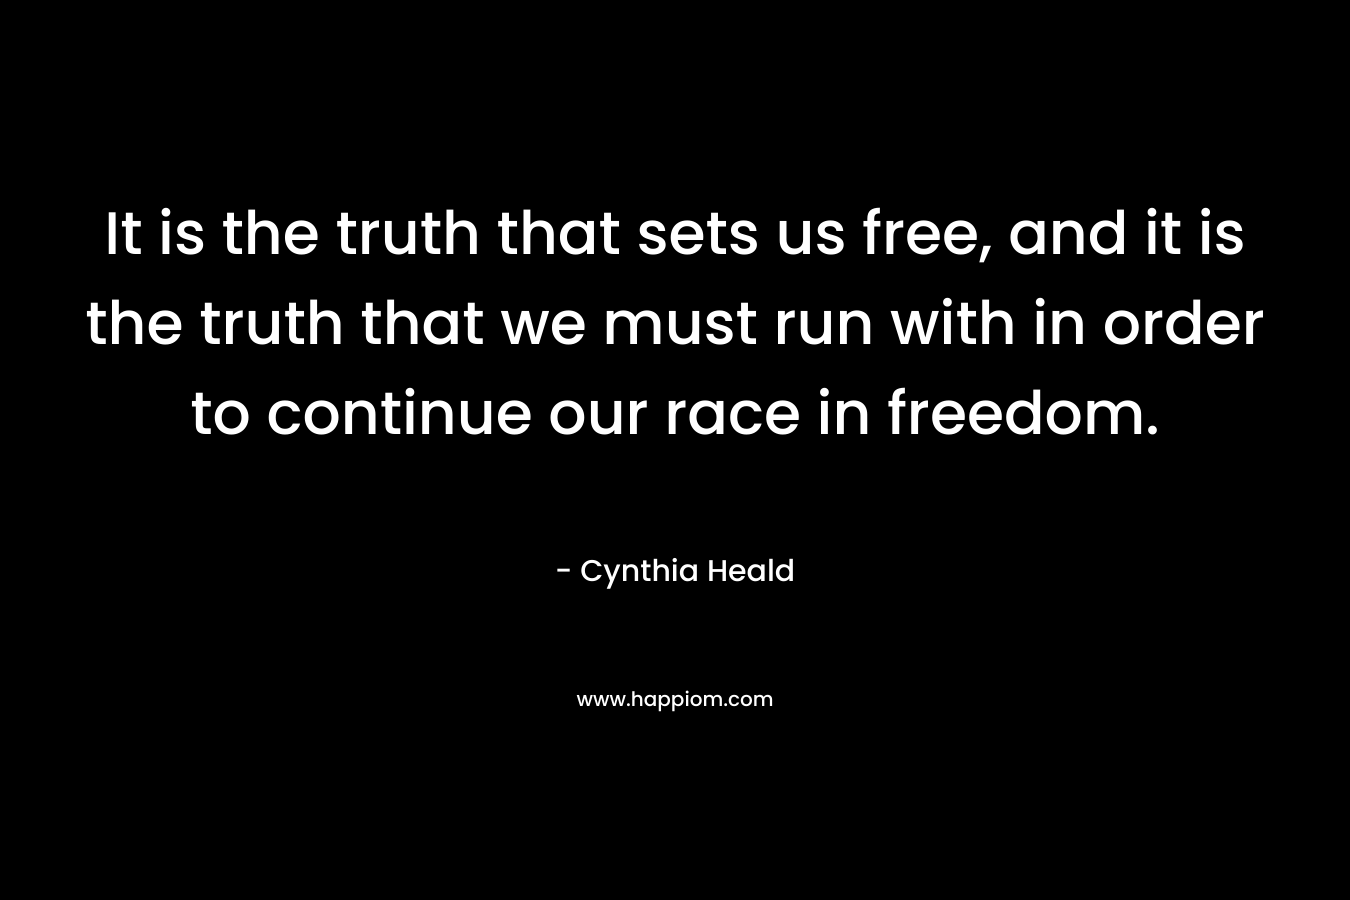 It is the truth that sets us free, and it is the truth that we must run with in order to continue our race in freedom. – Cynthia Heald